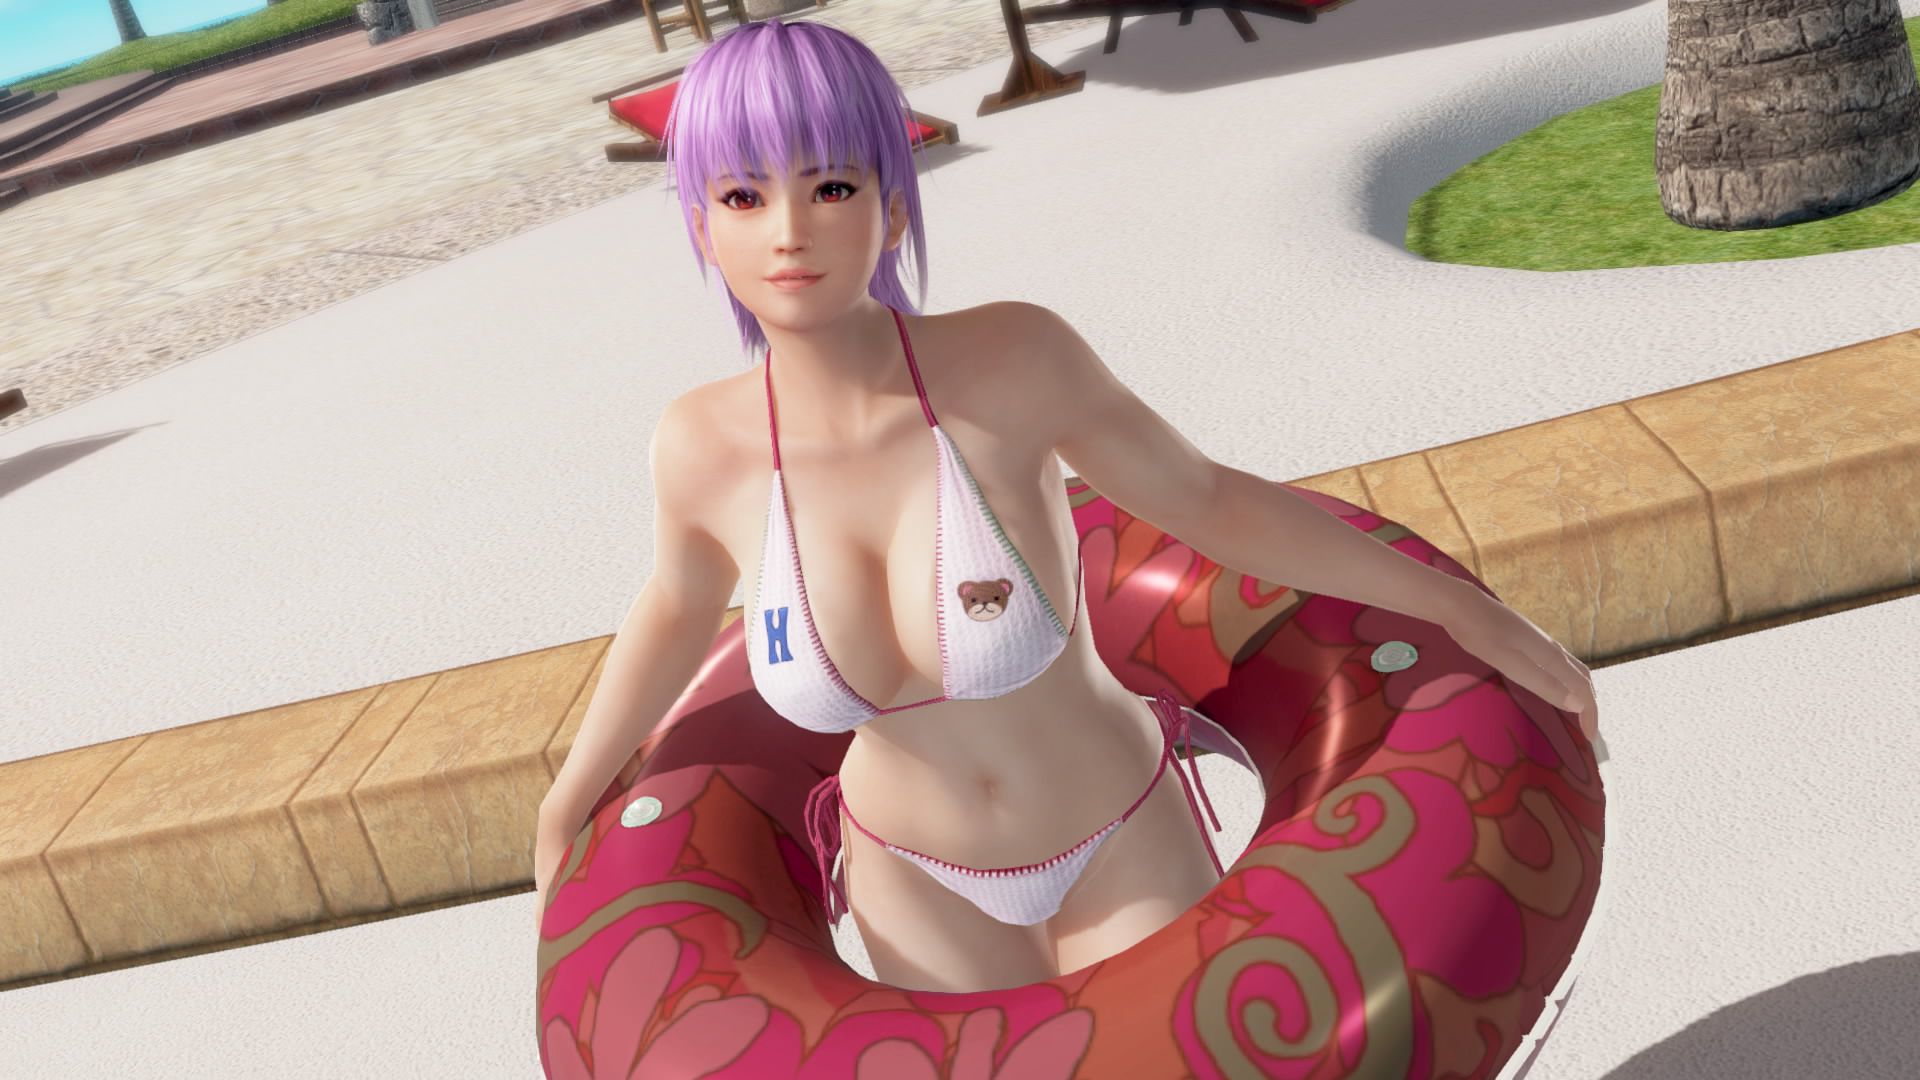 Doax3 "The color which suits the Aya-chan is pink" theory is verified 8